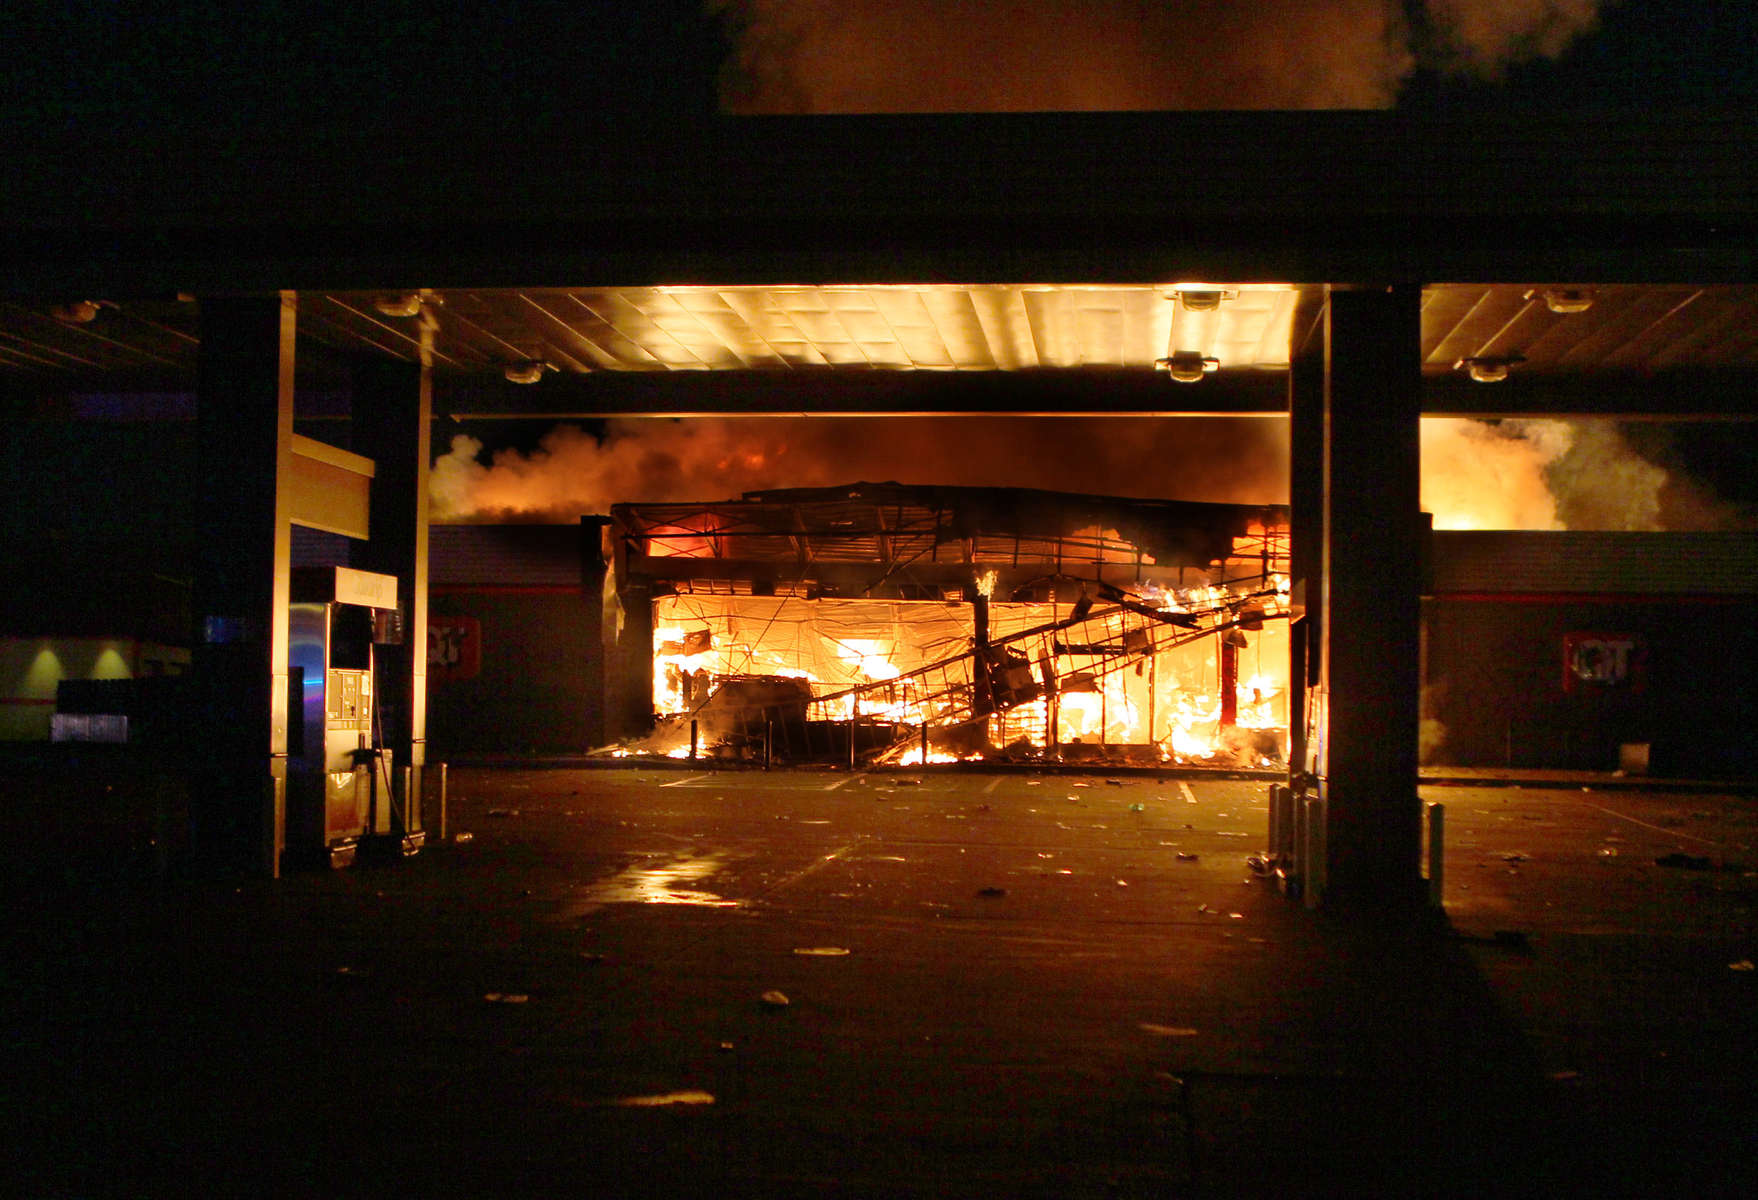 The QuikTrip in 9400 block of W. Florissant Avenue in Ferguson, Mo. burns after being looted by rioters on Sunday, Aug. 10, 2014.  The looting and riots began after a candlelight vigil for Michael Brown when confrontions between police and protesters spiraled out of control.